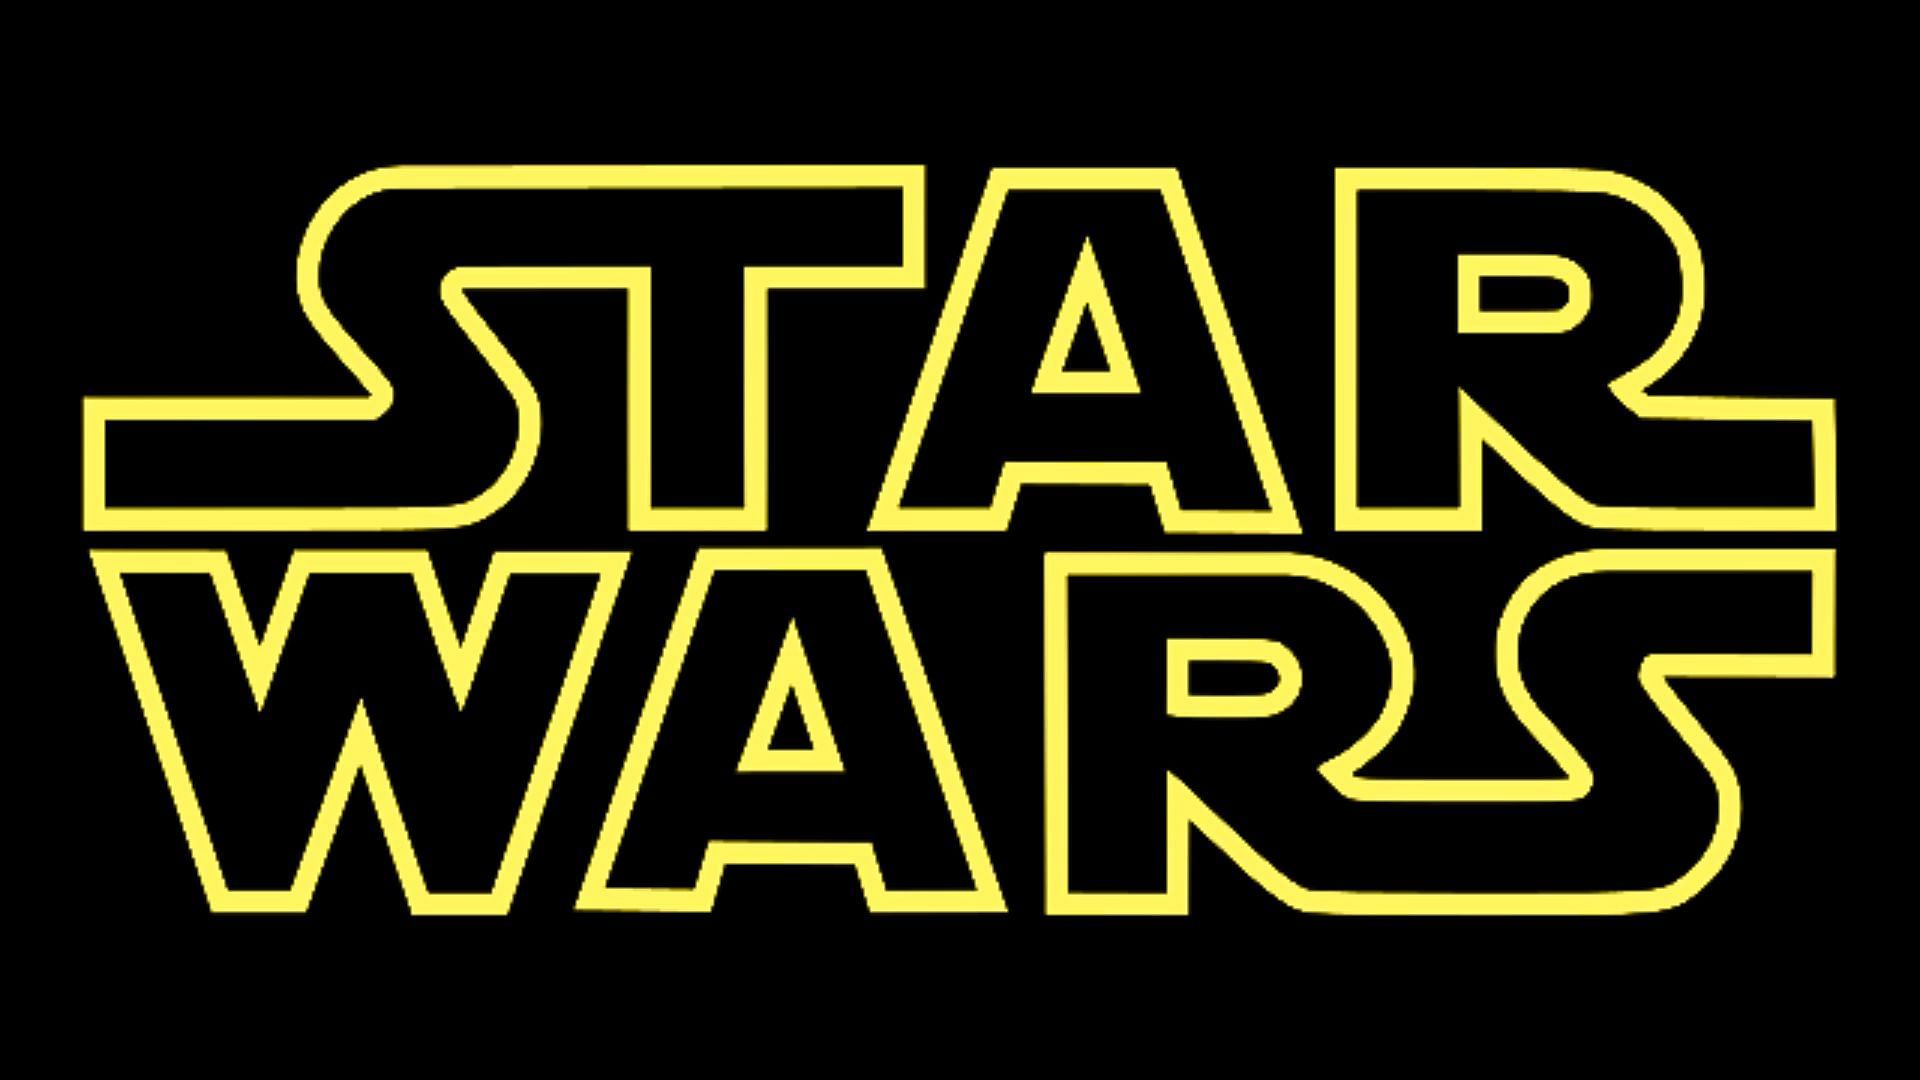 The Star Wars franchise began with the release of Star Wars: Episode IV - A New Hope on May 25, 1977 (Image via Wikimedia Commons)